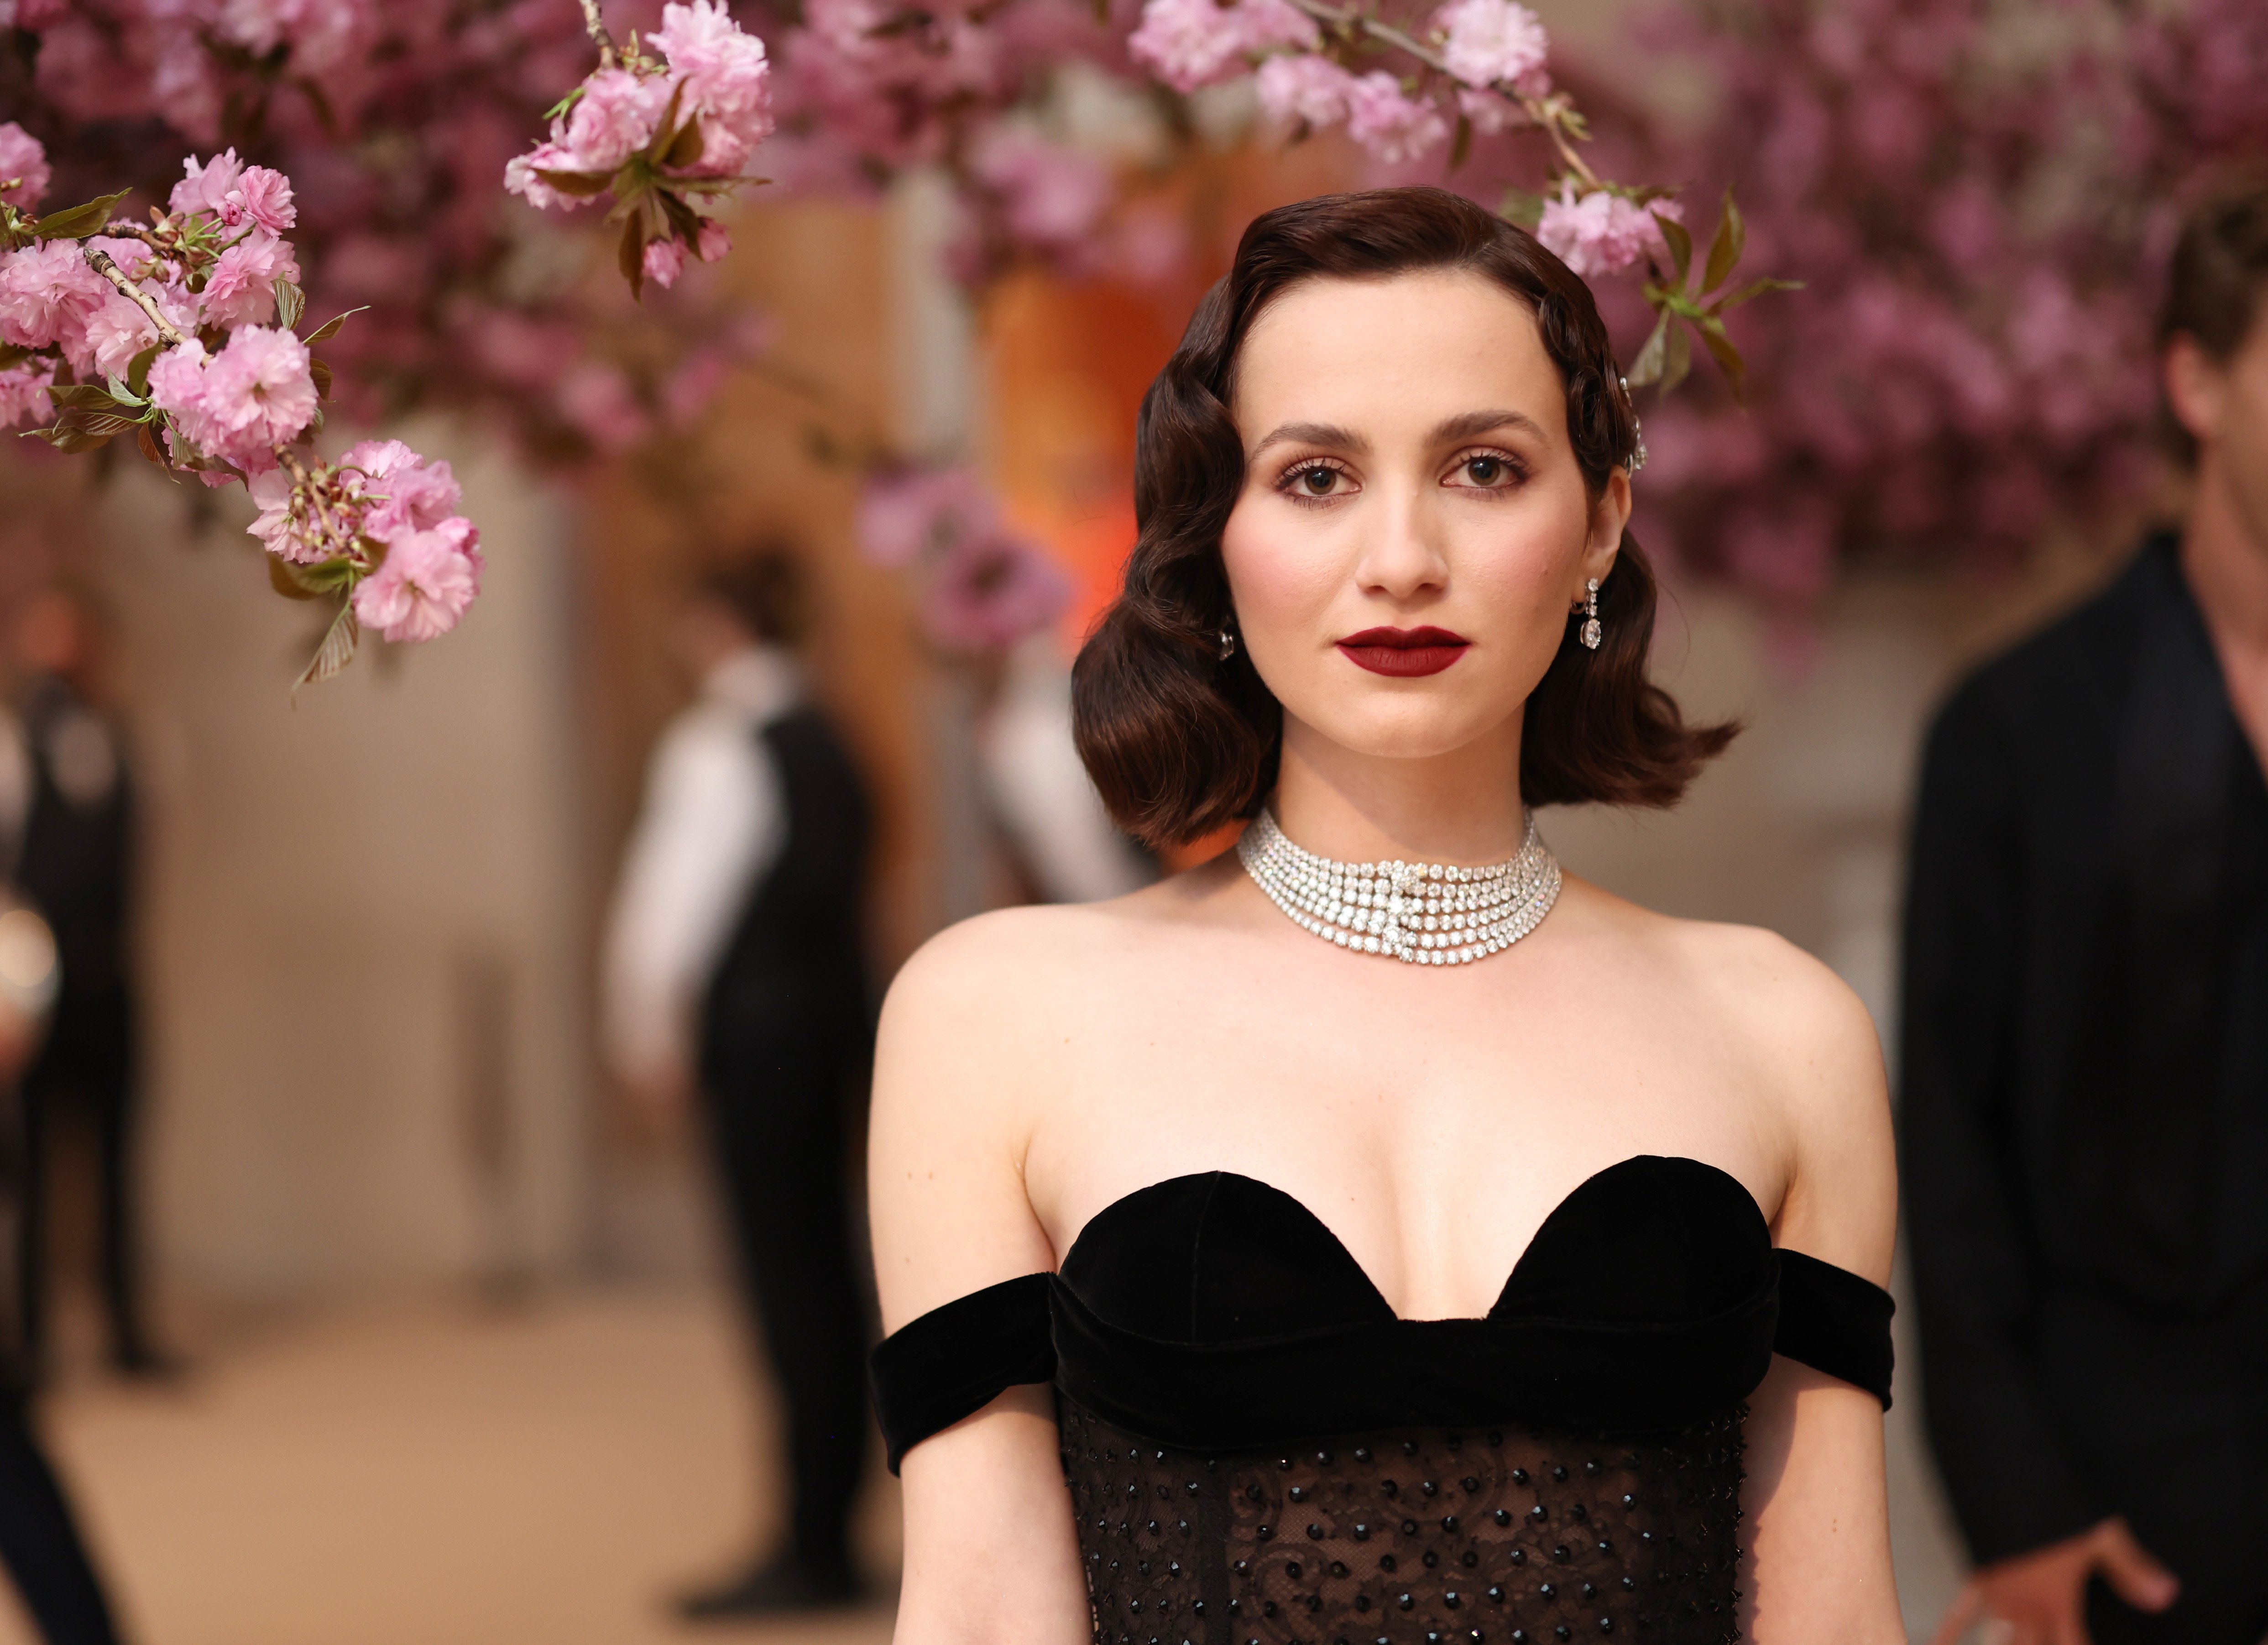 Maude Apatow at the 2022 Met Gala on May 2, 2022 | Source: Getty Images